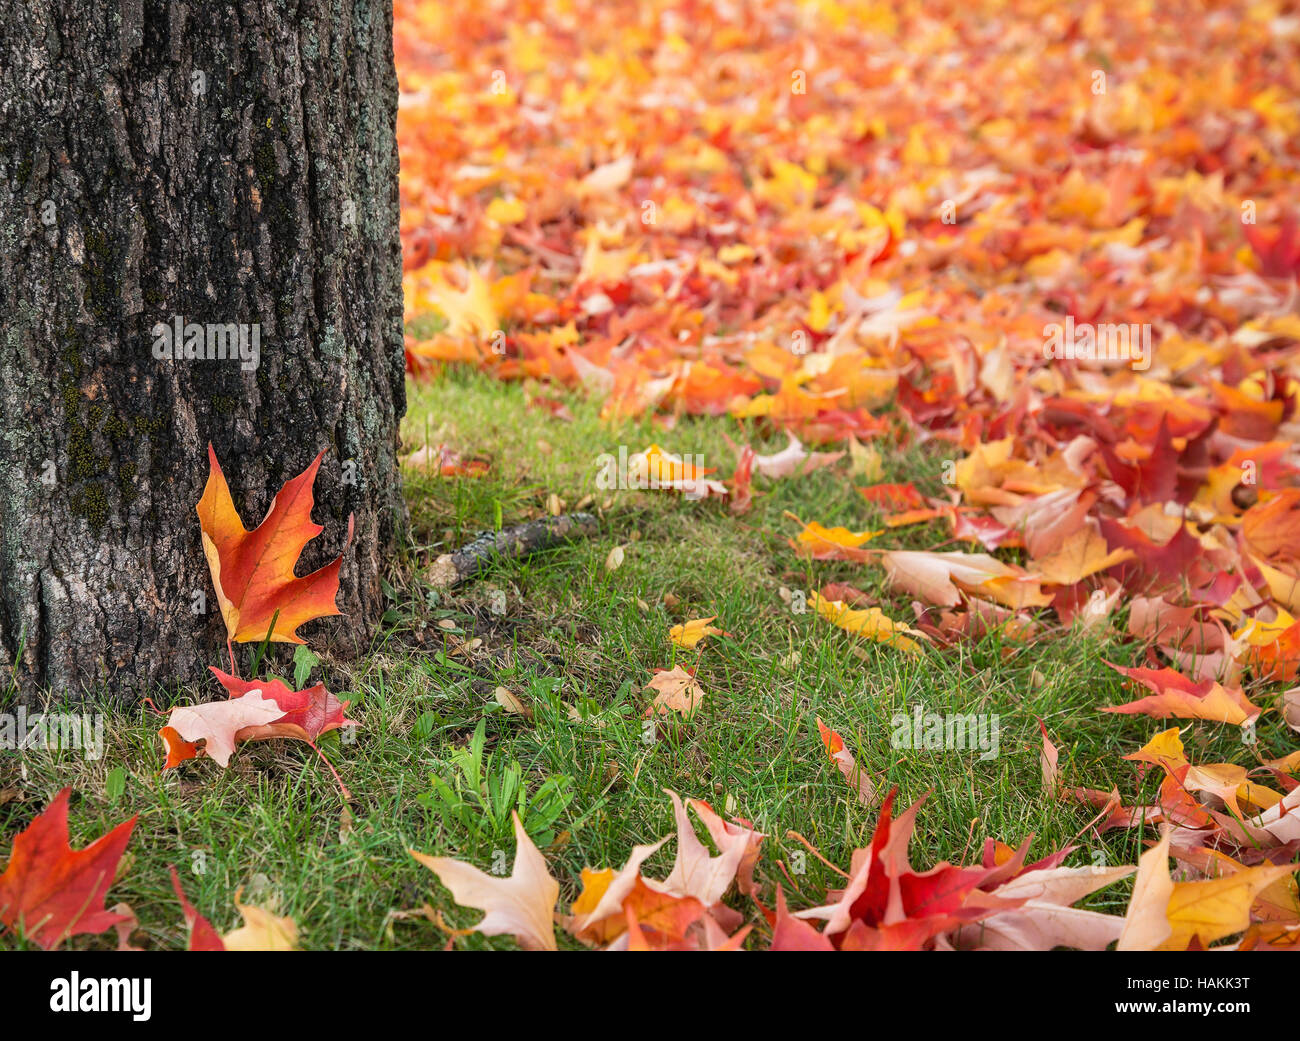 Colorful autumn maple leaves blanket under tree Stock Photo